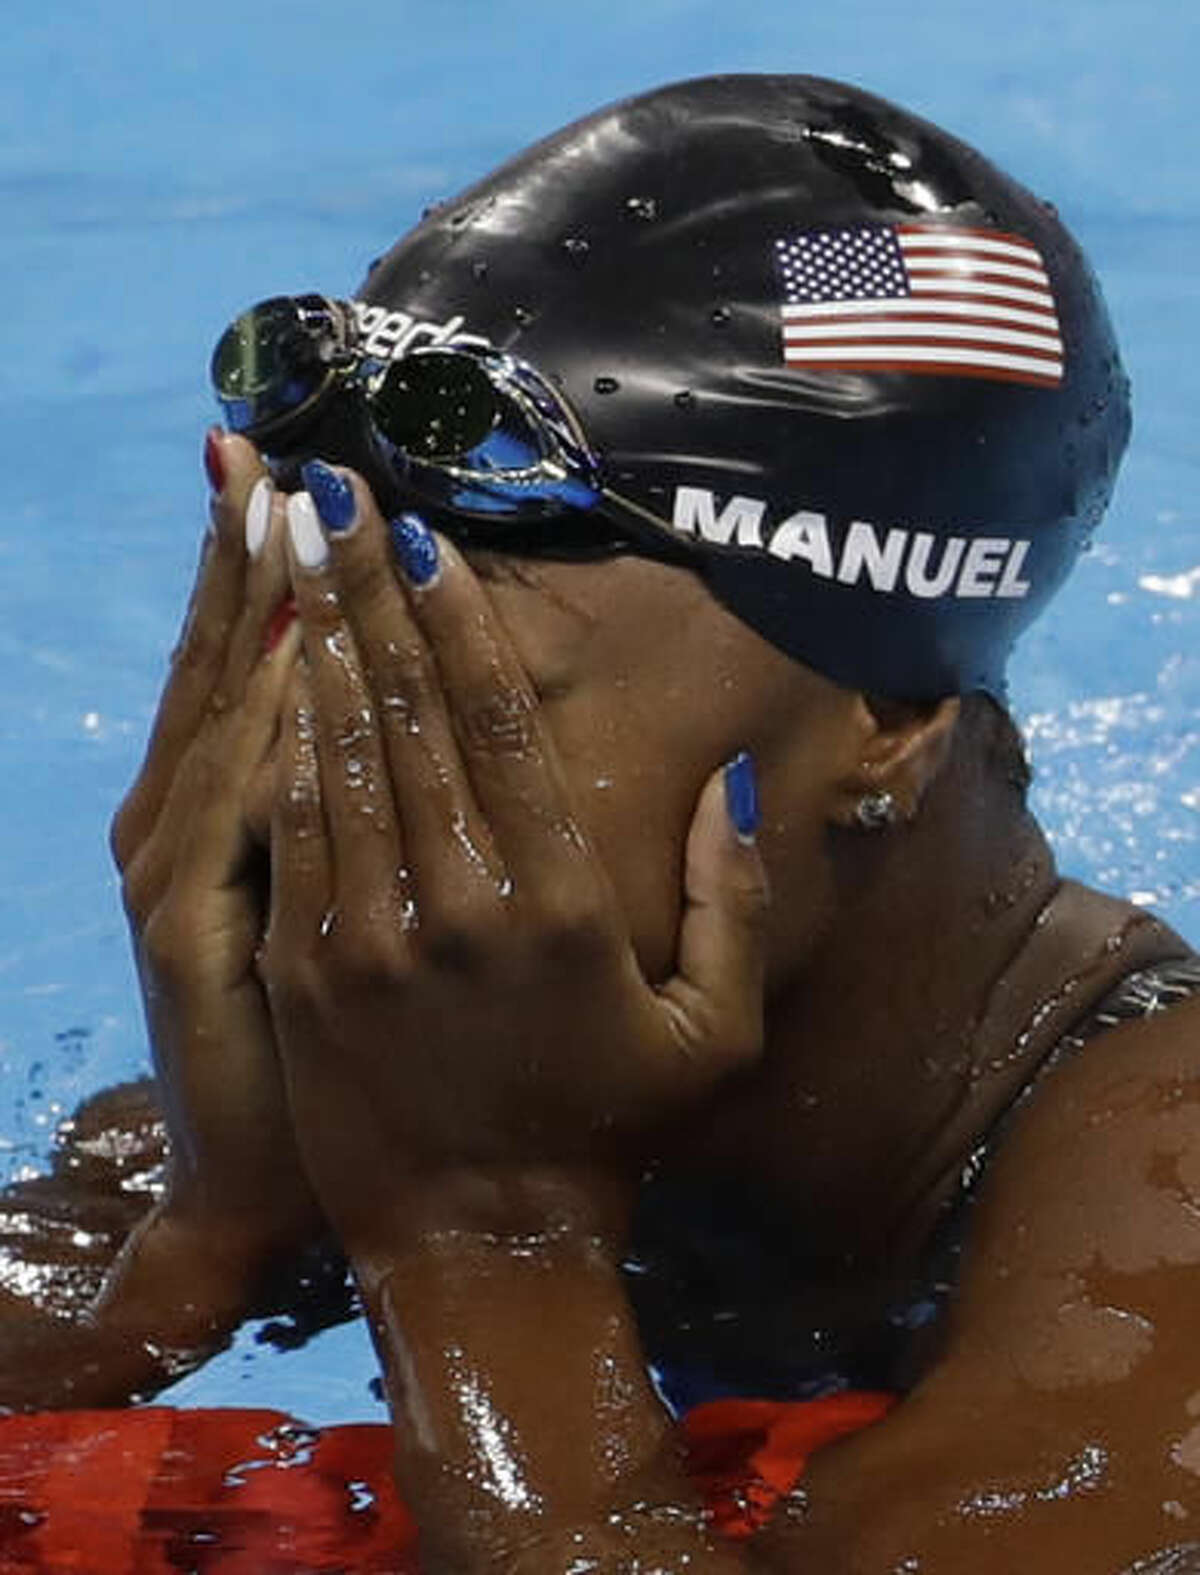 United States' Simone Manuel wins the gold medal setting a new olympic record in the women's 100-meter freestyle during the swimming competitions at the 2016 Summer Olympics, Thursday, Aug. 11, 2016, in Rio de Janeiro, Brazil. (AP Photo/Natacha Pisarenko)